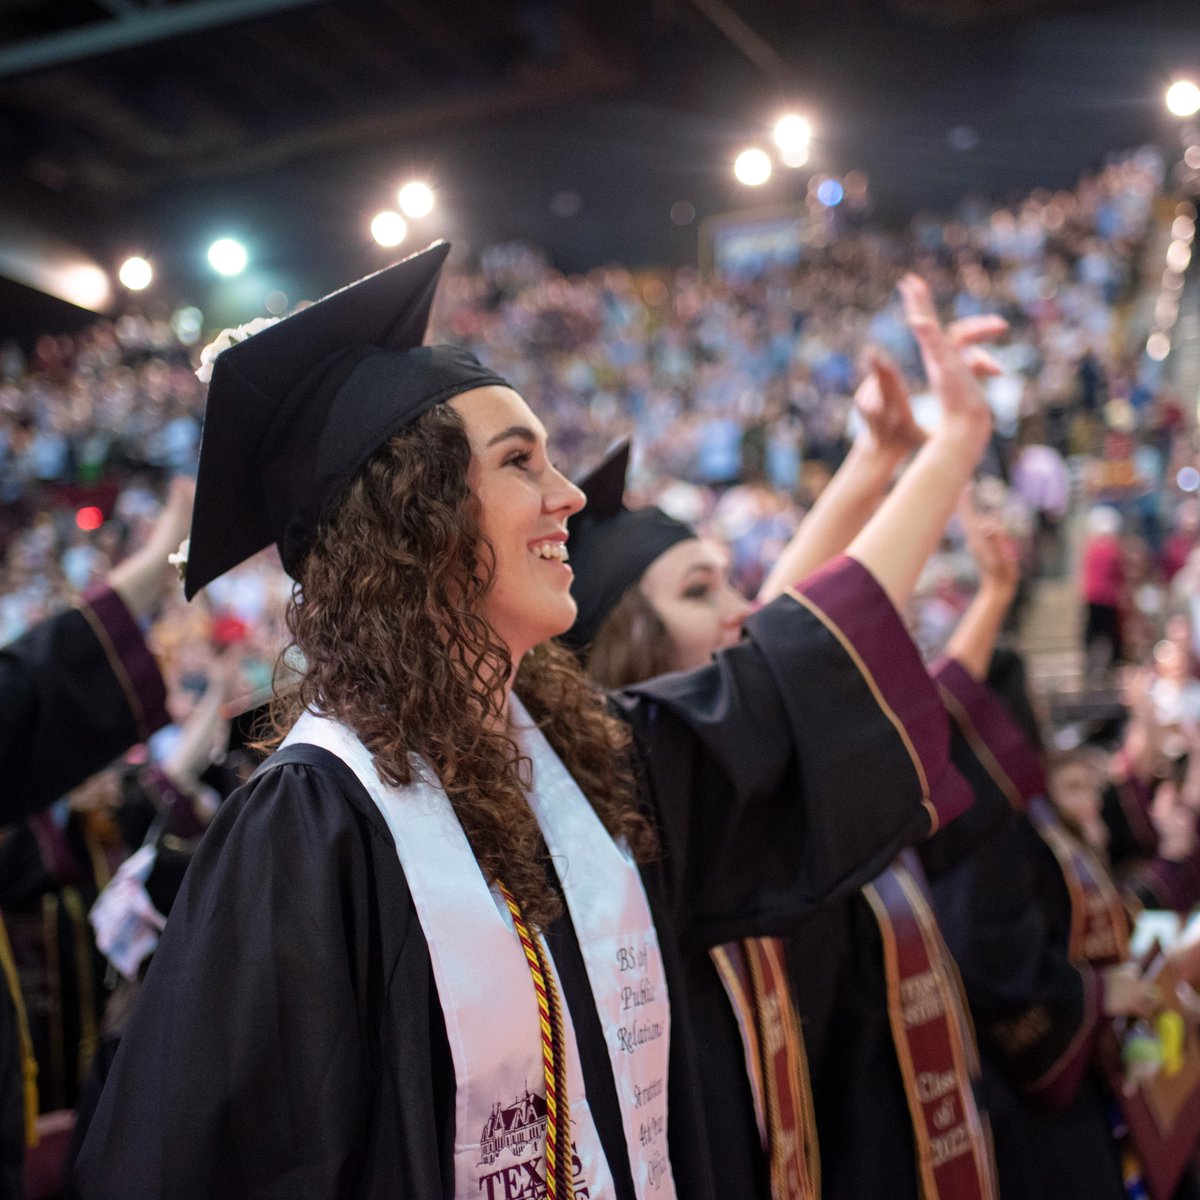 Congratulations to our College of Health Professions graduates and to the entire @txst Class of Spring 2023! #txsthealth #txstnext #txst23